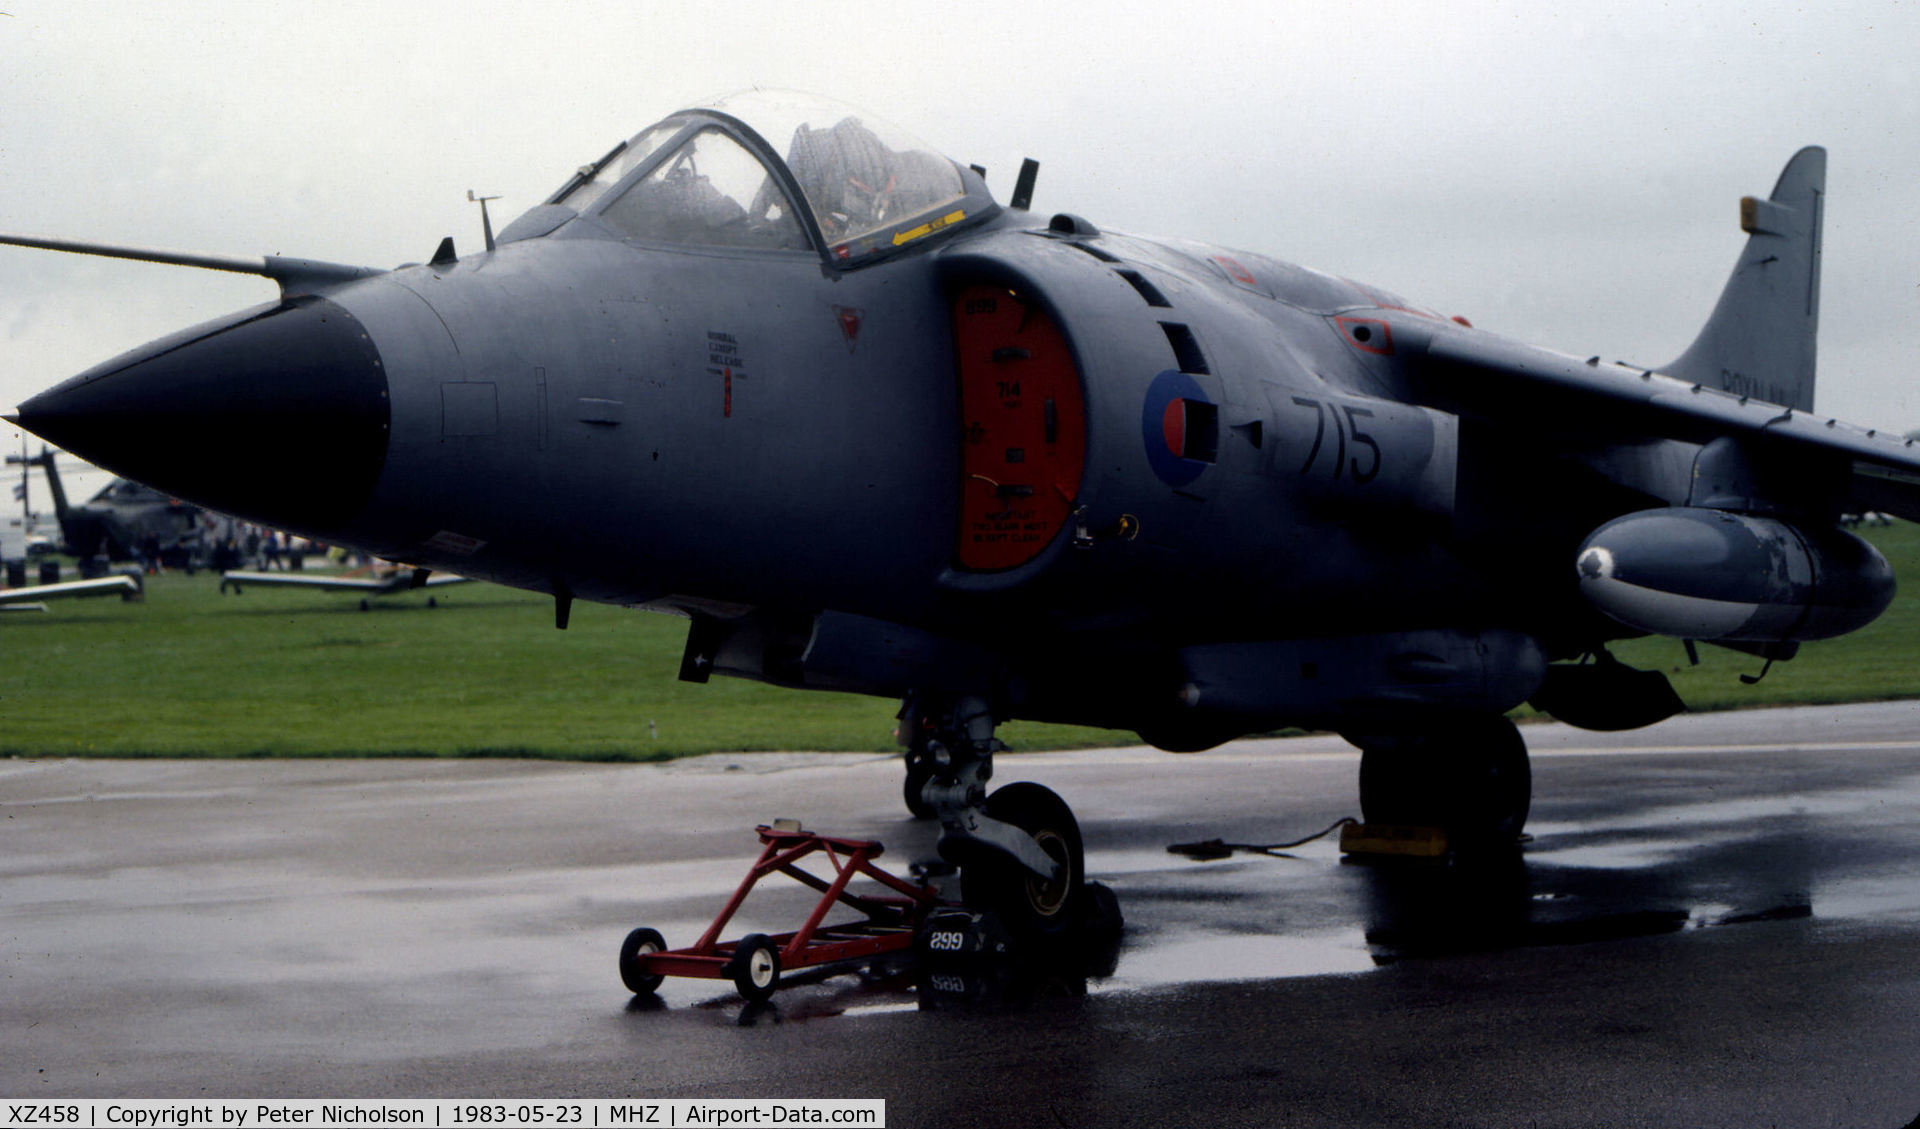 XZ458, 1980 British Aerospace Sea Harrier FRS.1 C/N 41H-912012, Sea Harrier FRS.1 of 899 Squadron on the flight-line at the 1983 RAF Mildenhall Air Fete.